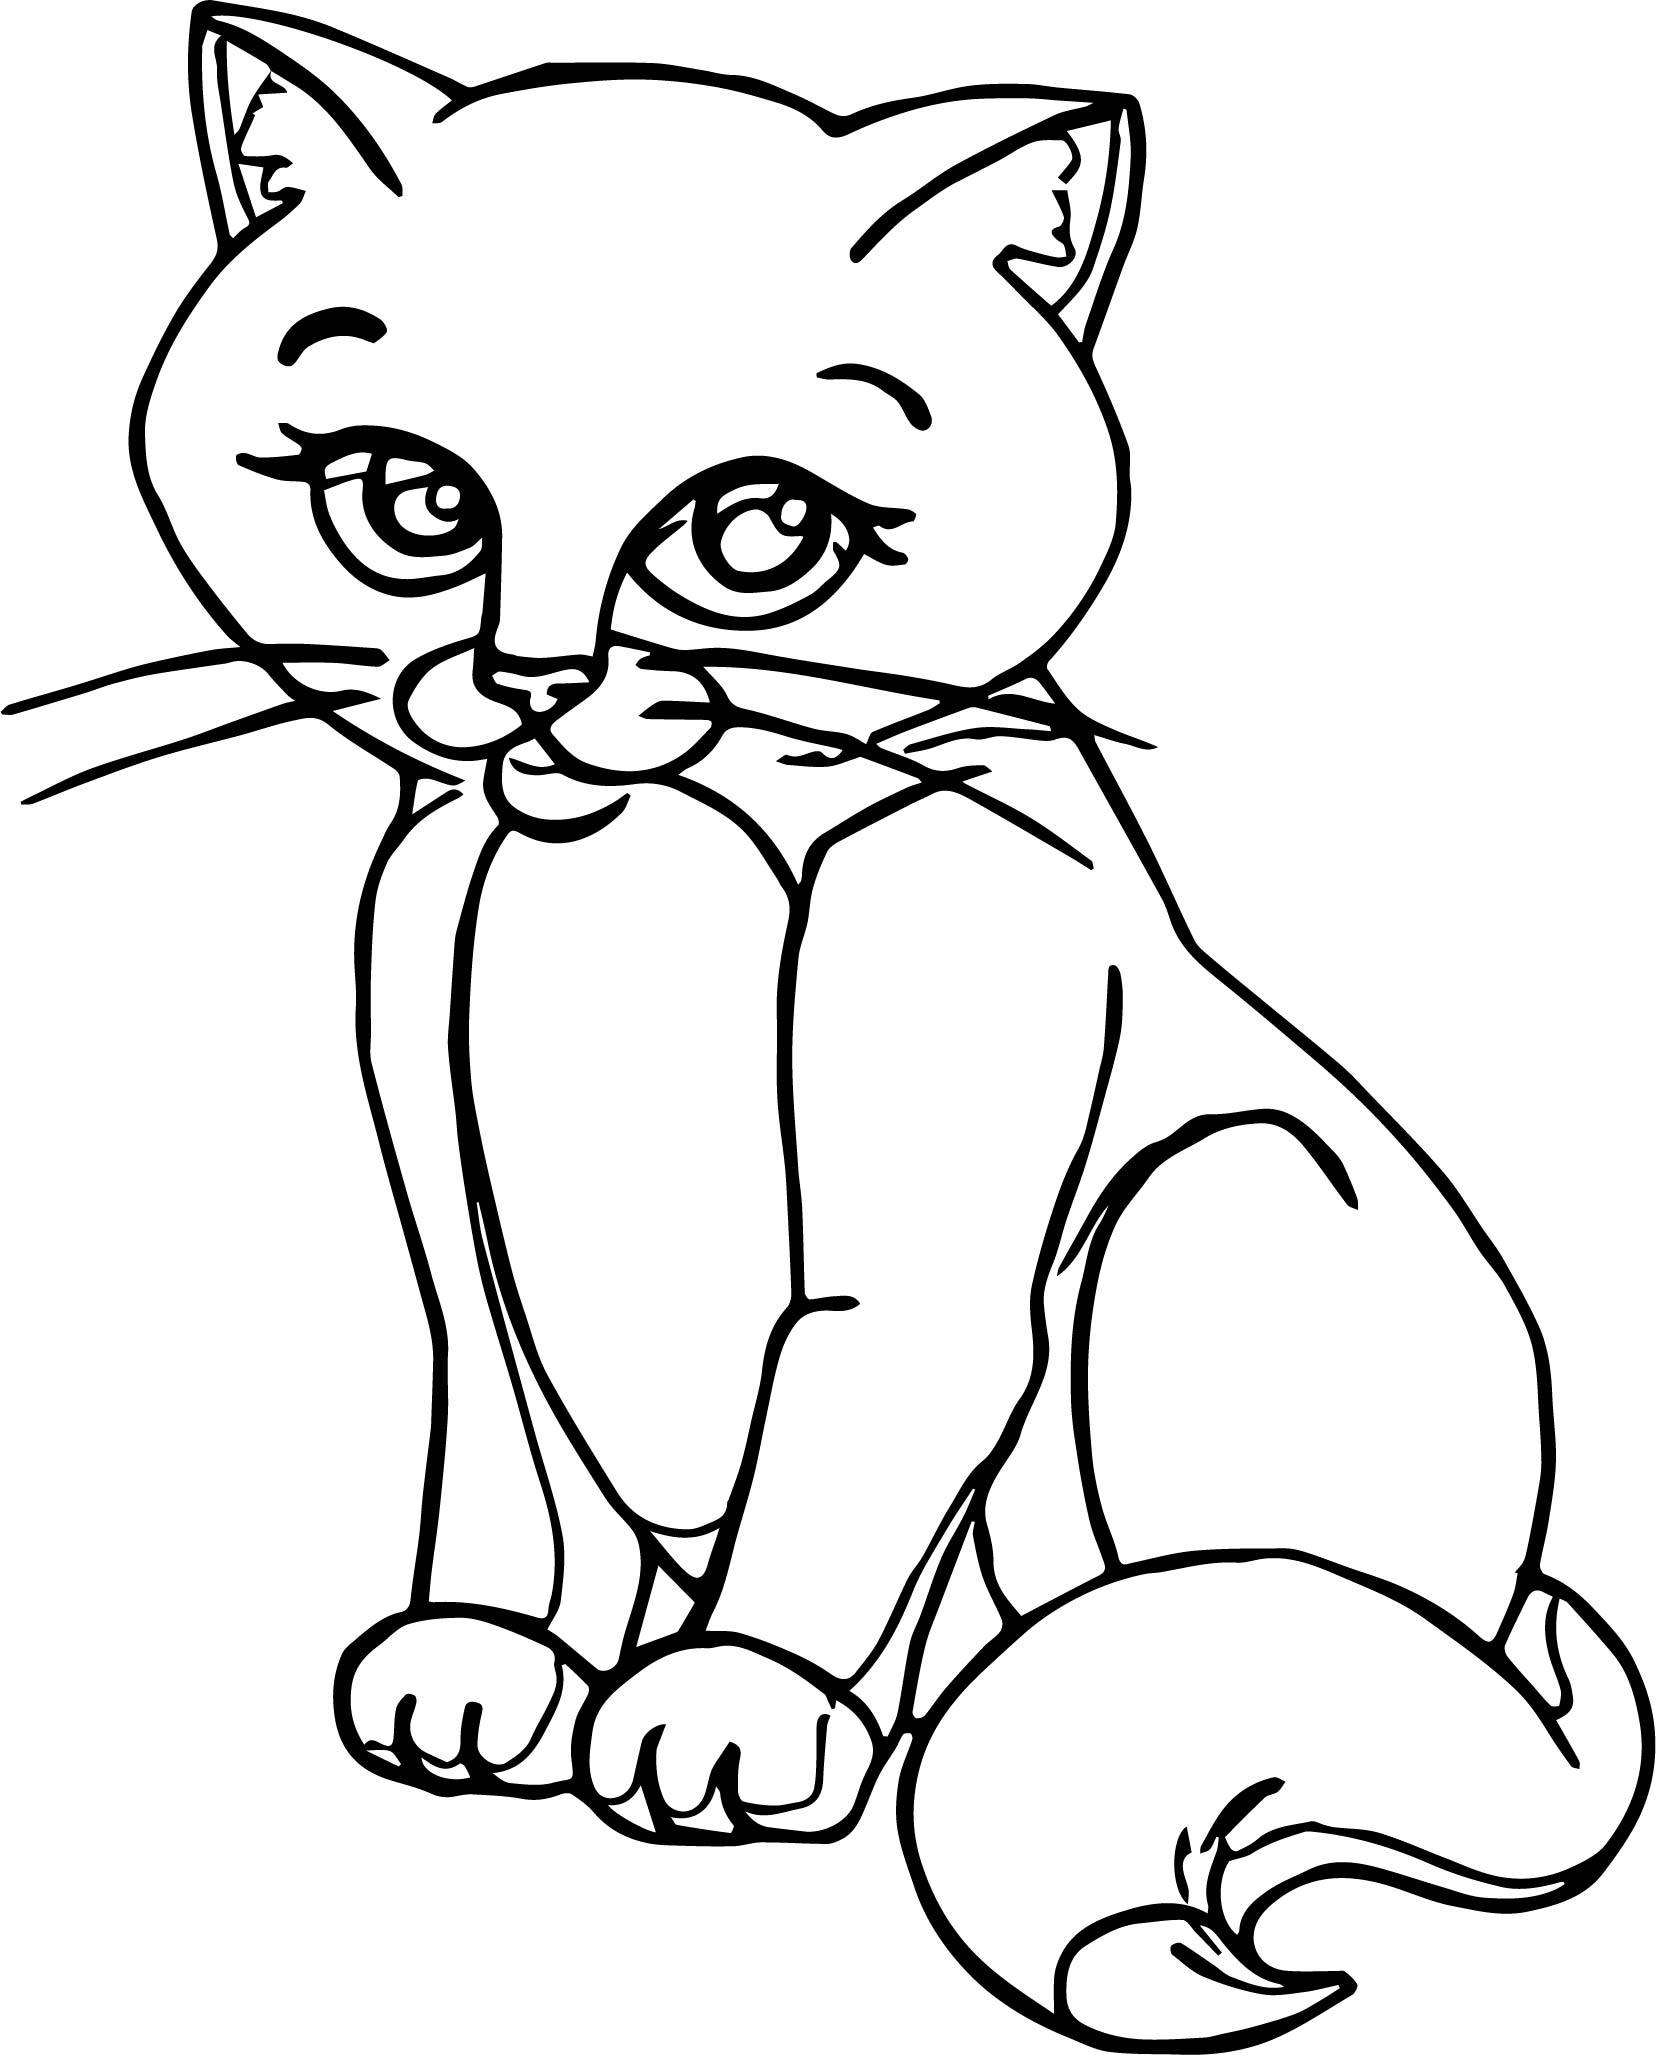 Persian Cat Coloring Pages at Free printable colorings pages to print and color